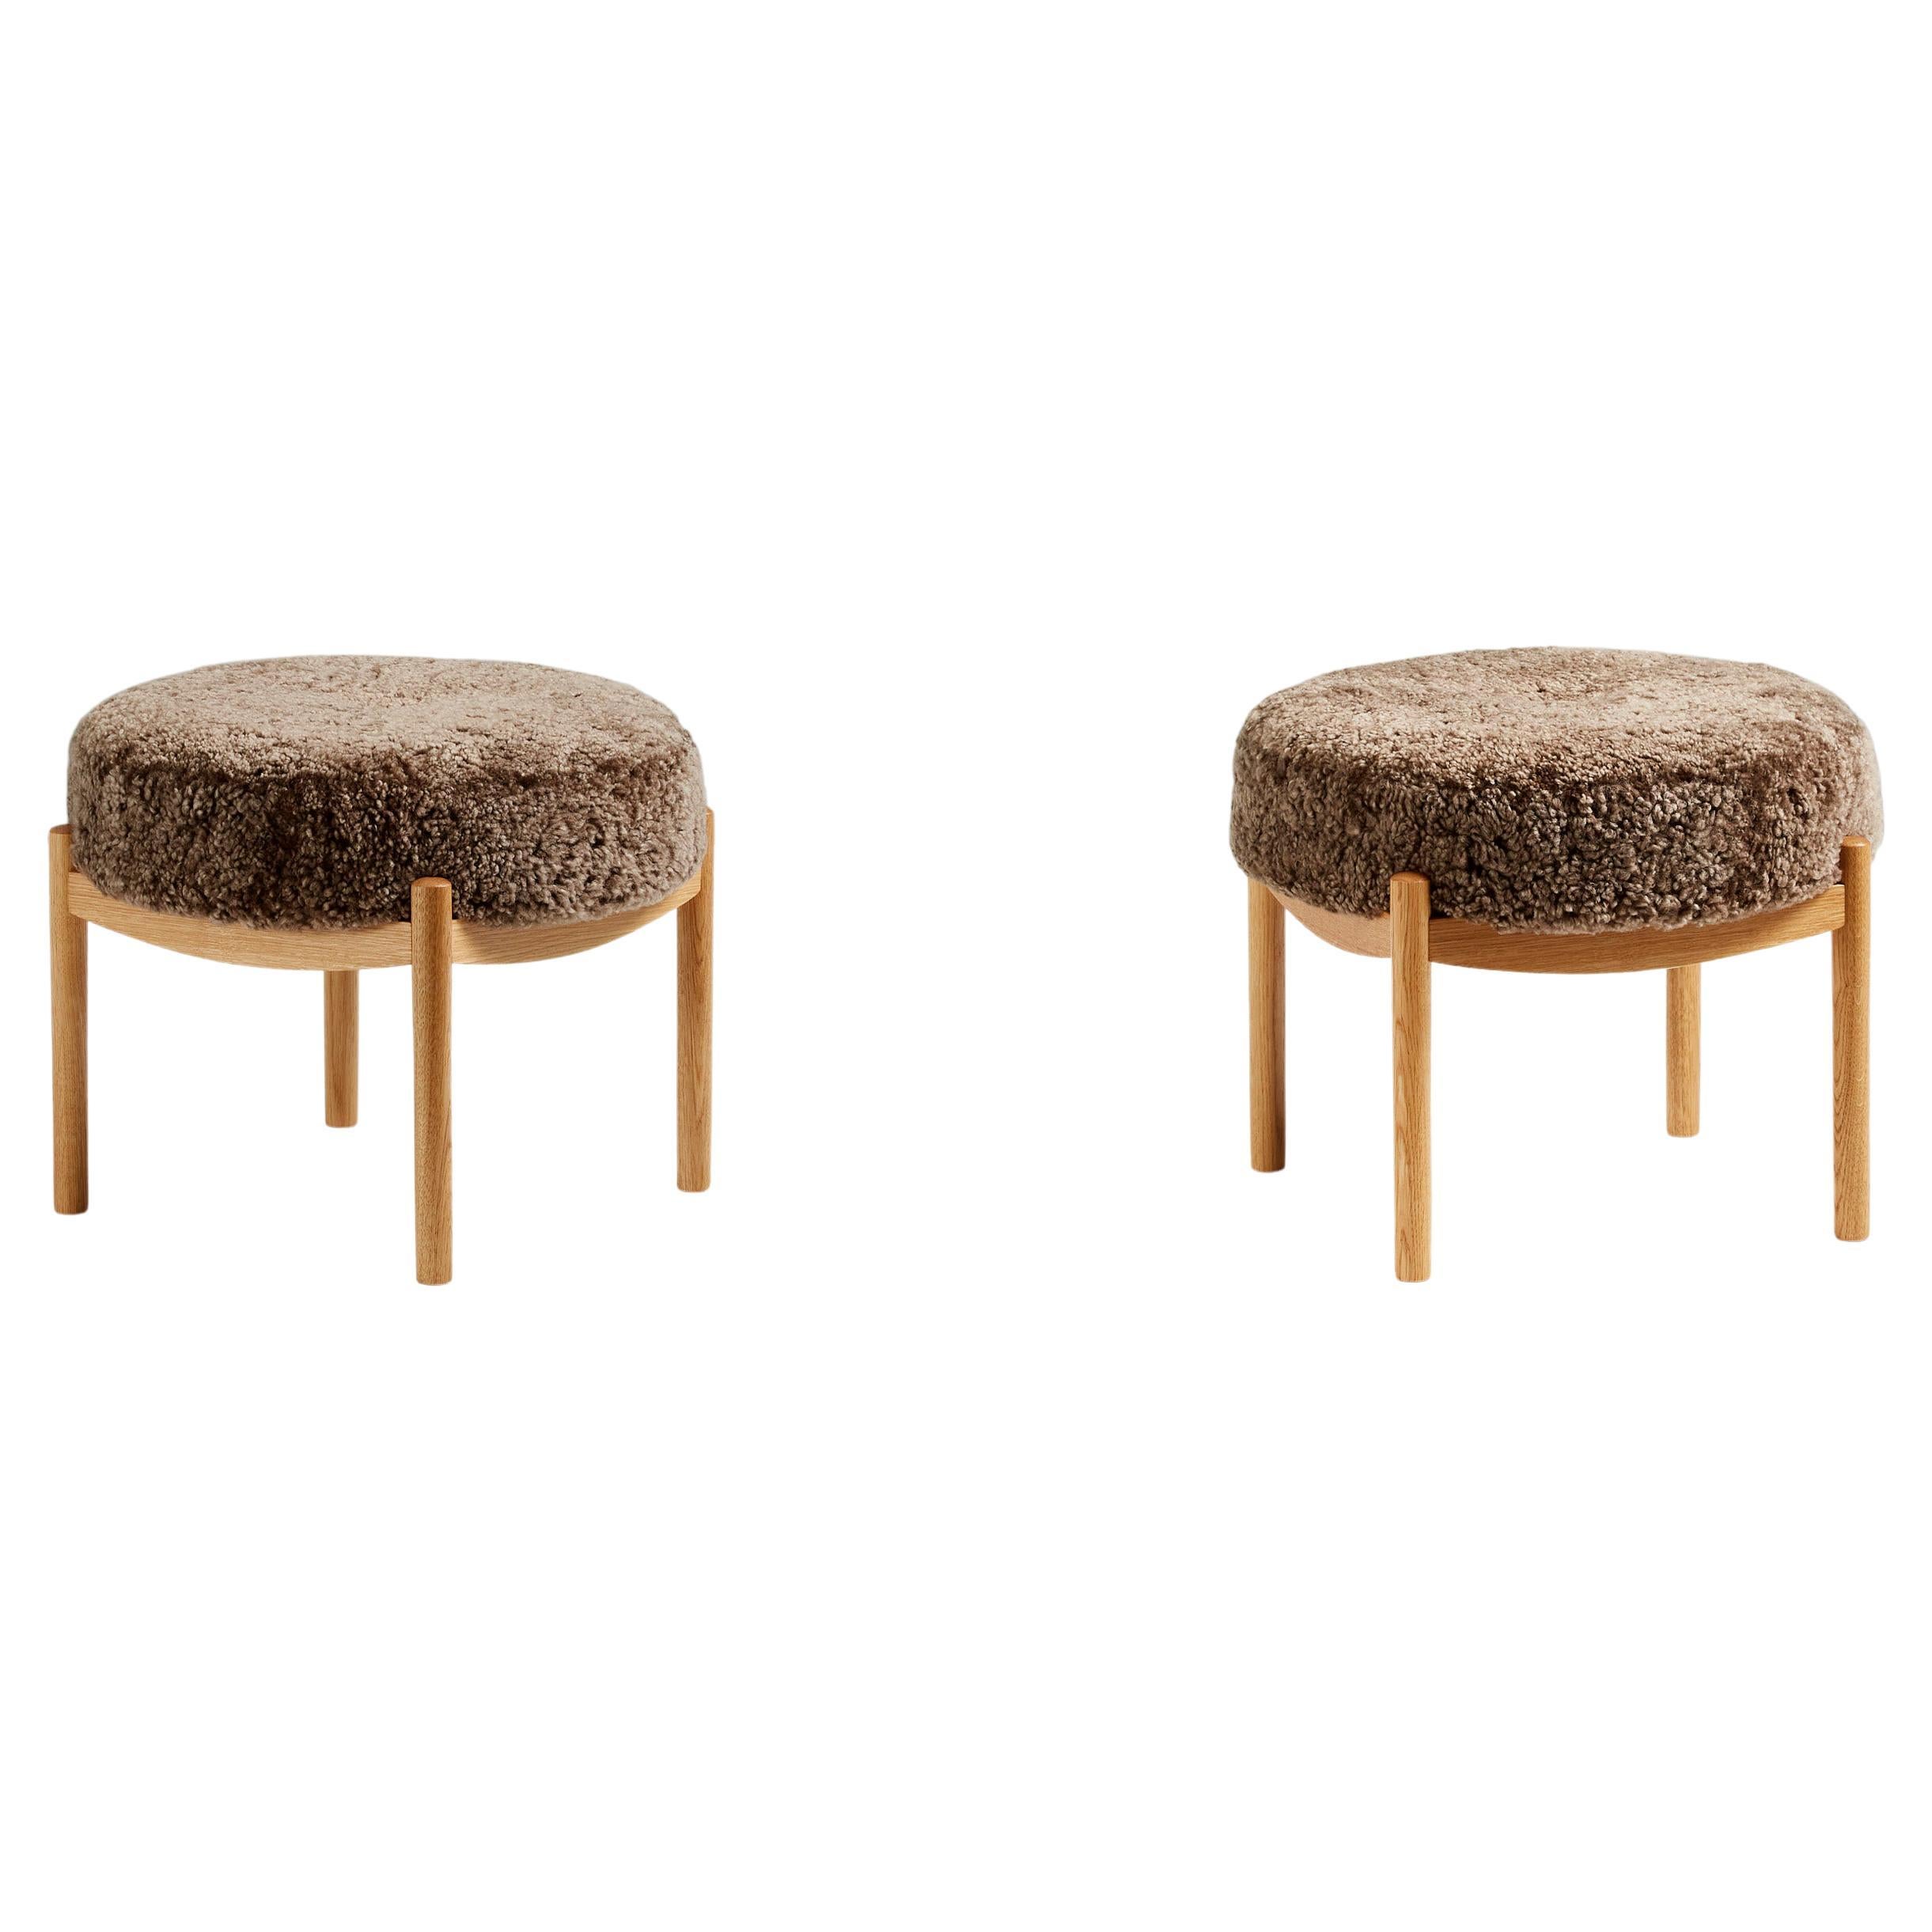 Pair of Custom Made Oak and Shearling Ottomans